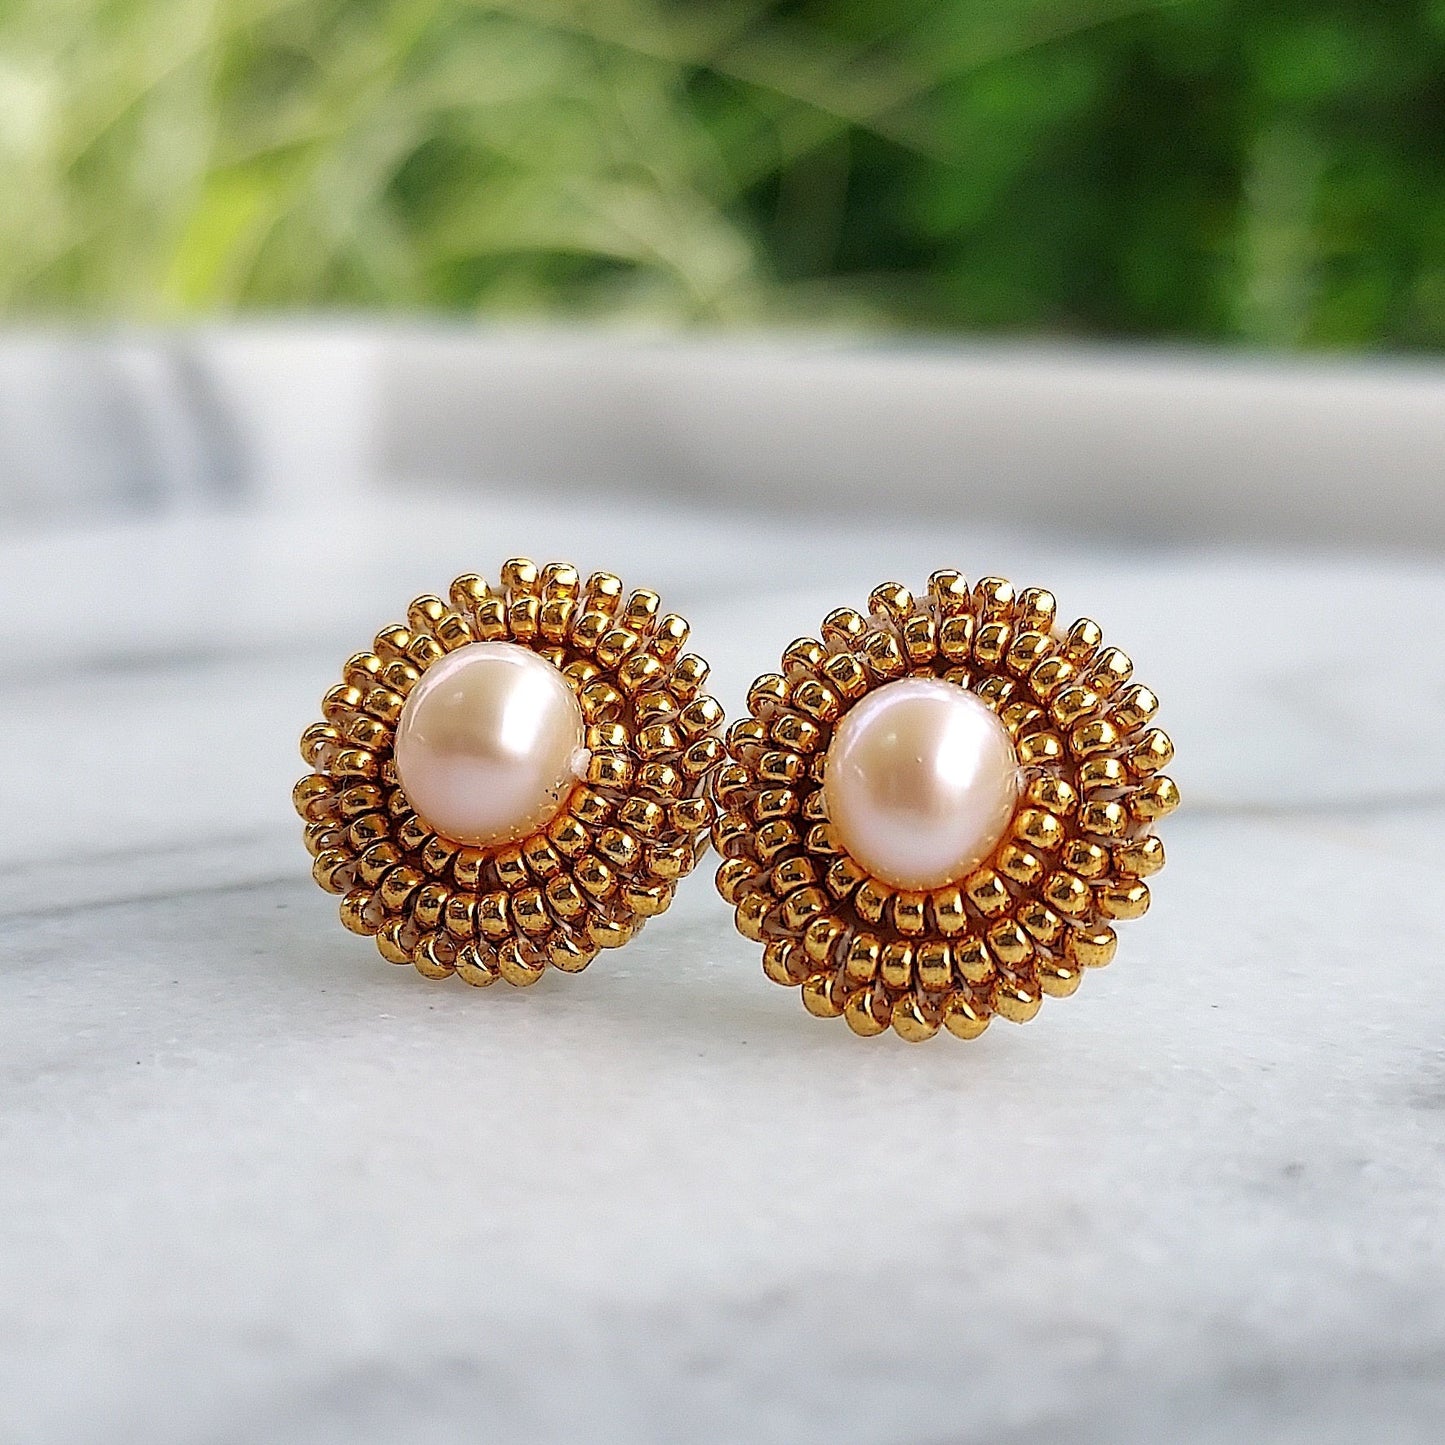 Cheyanne Symone’s Golden Hour Freshwater Pearl Earrings | Golden Hour Seed Beads Wrapped Around a Freshwater Pearl Center